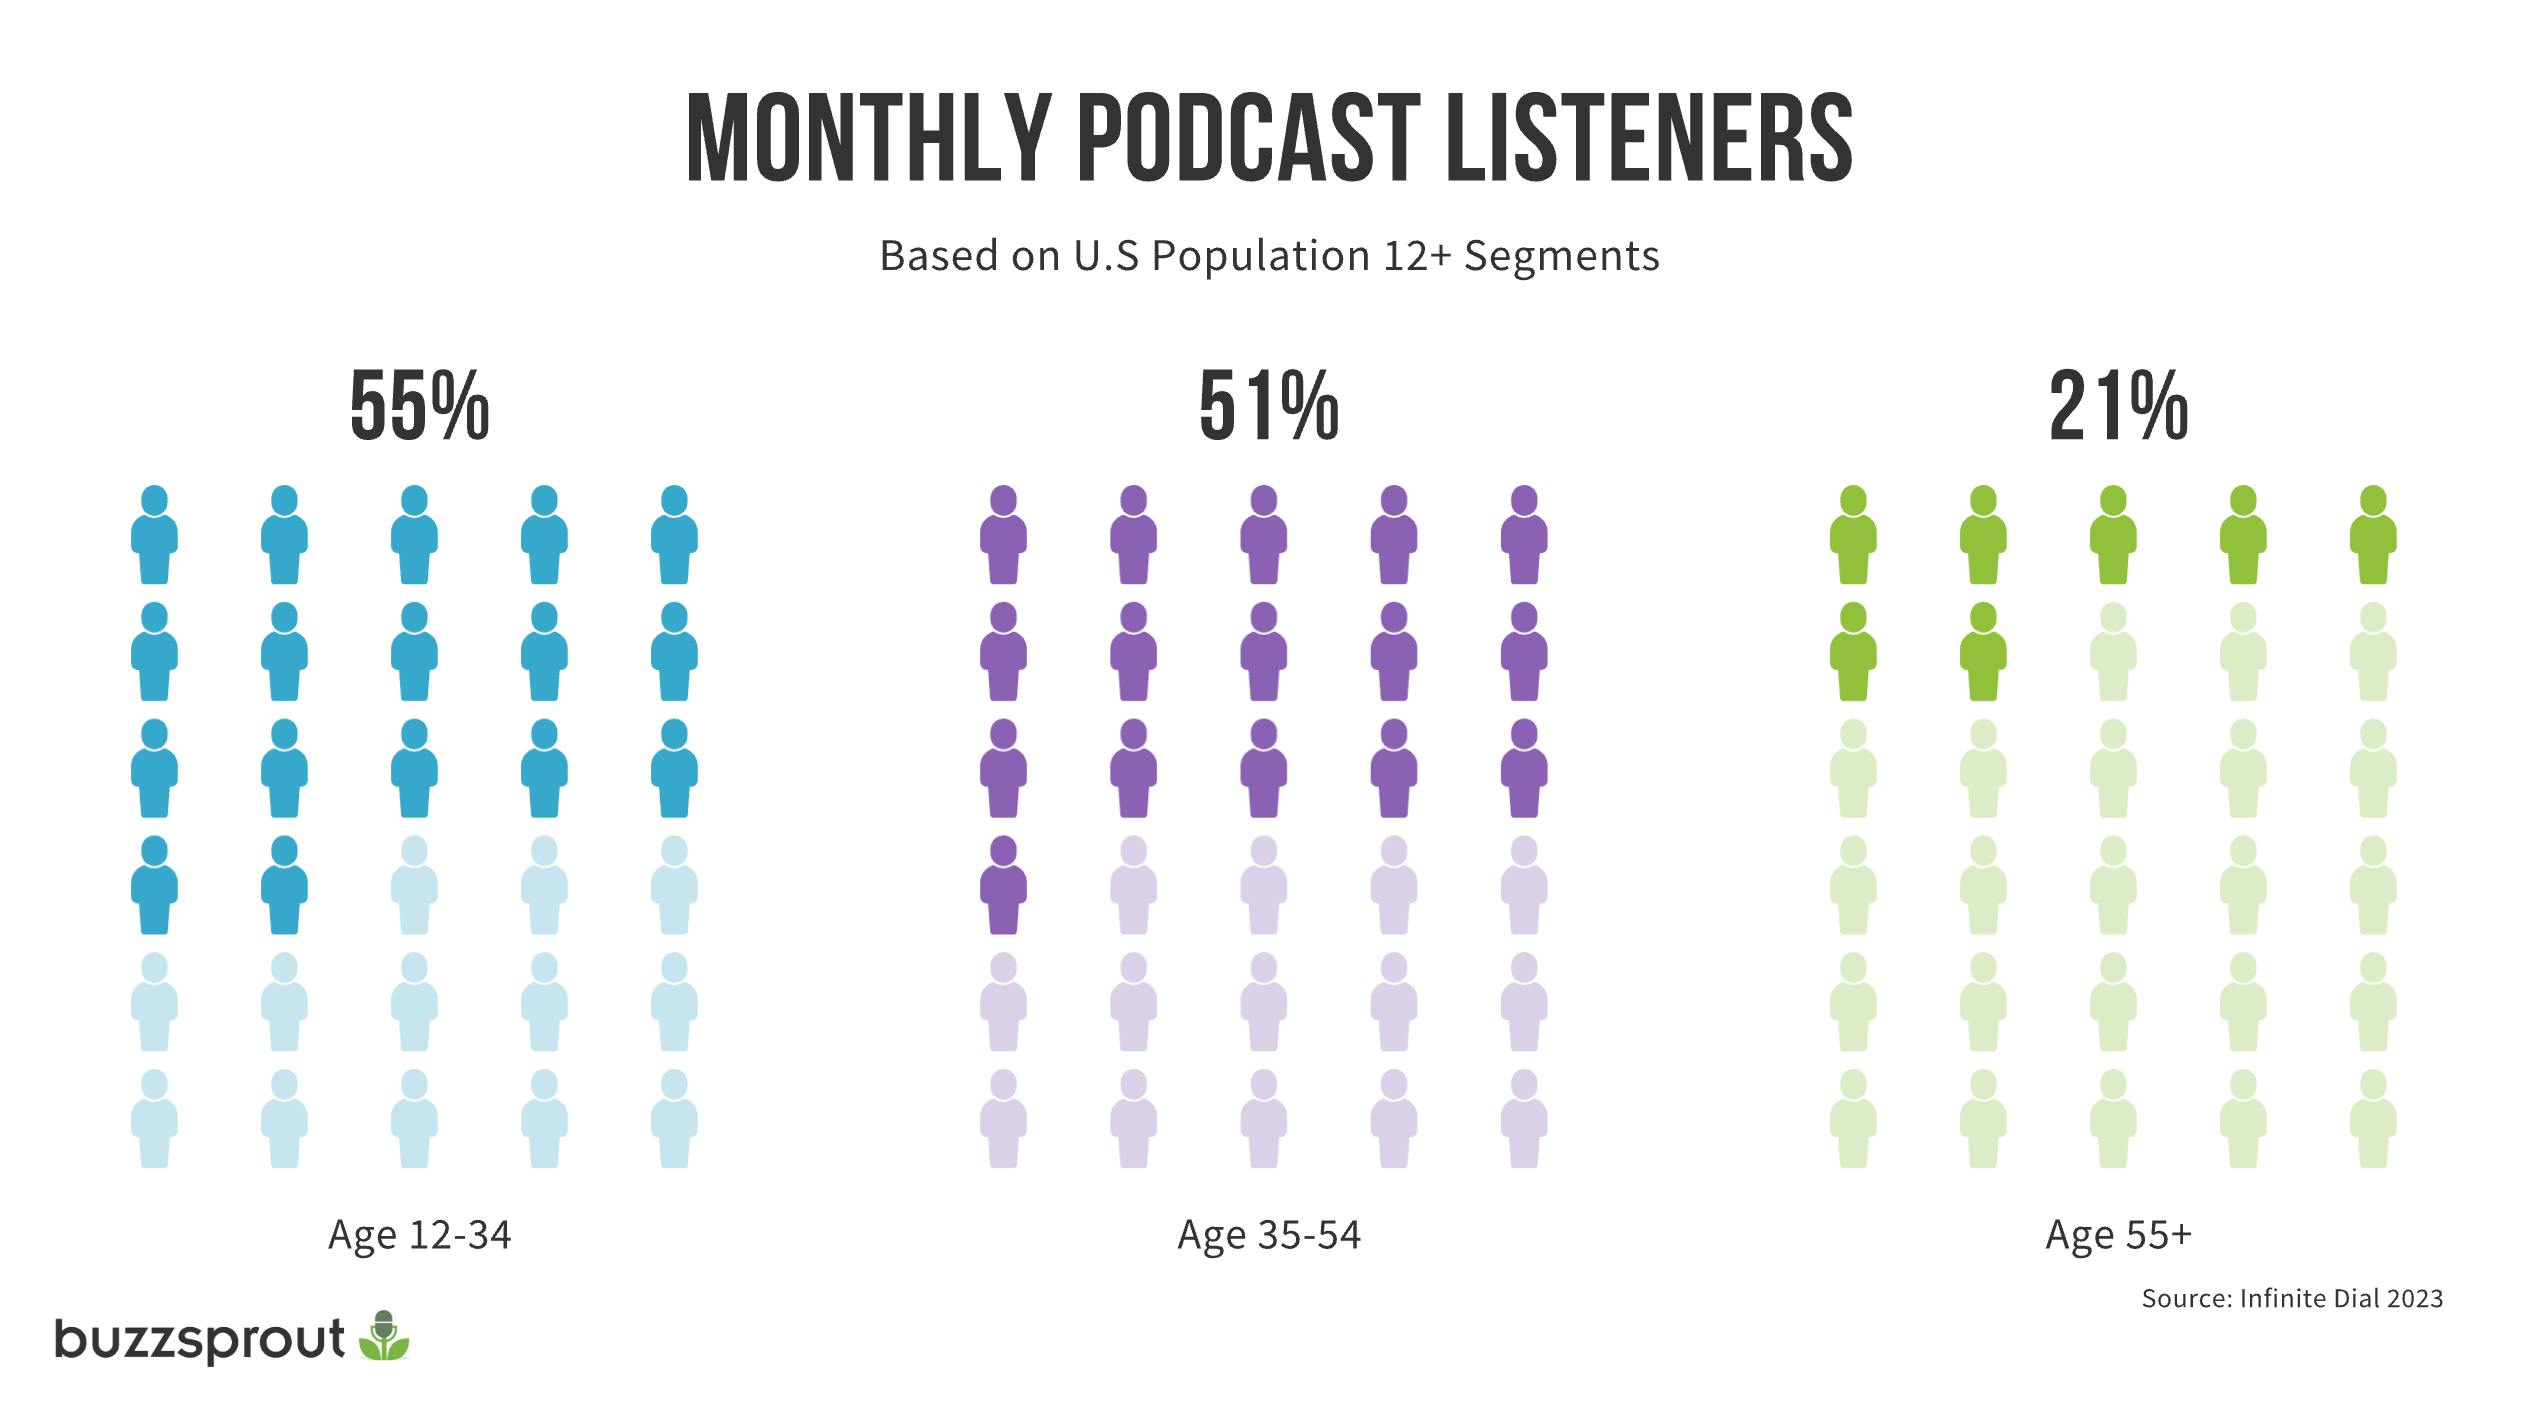 Monthly podcast listeners by age range